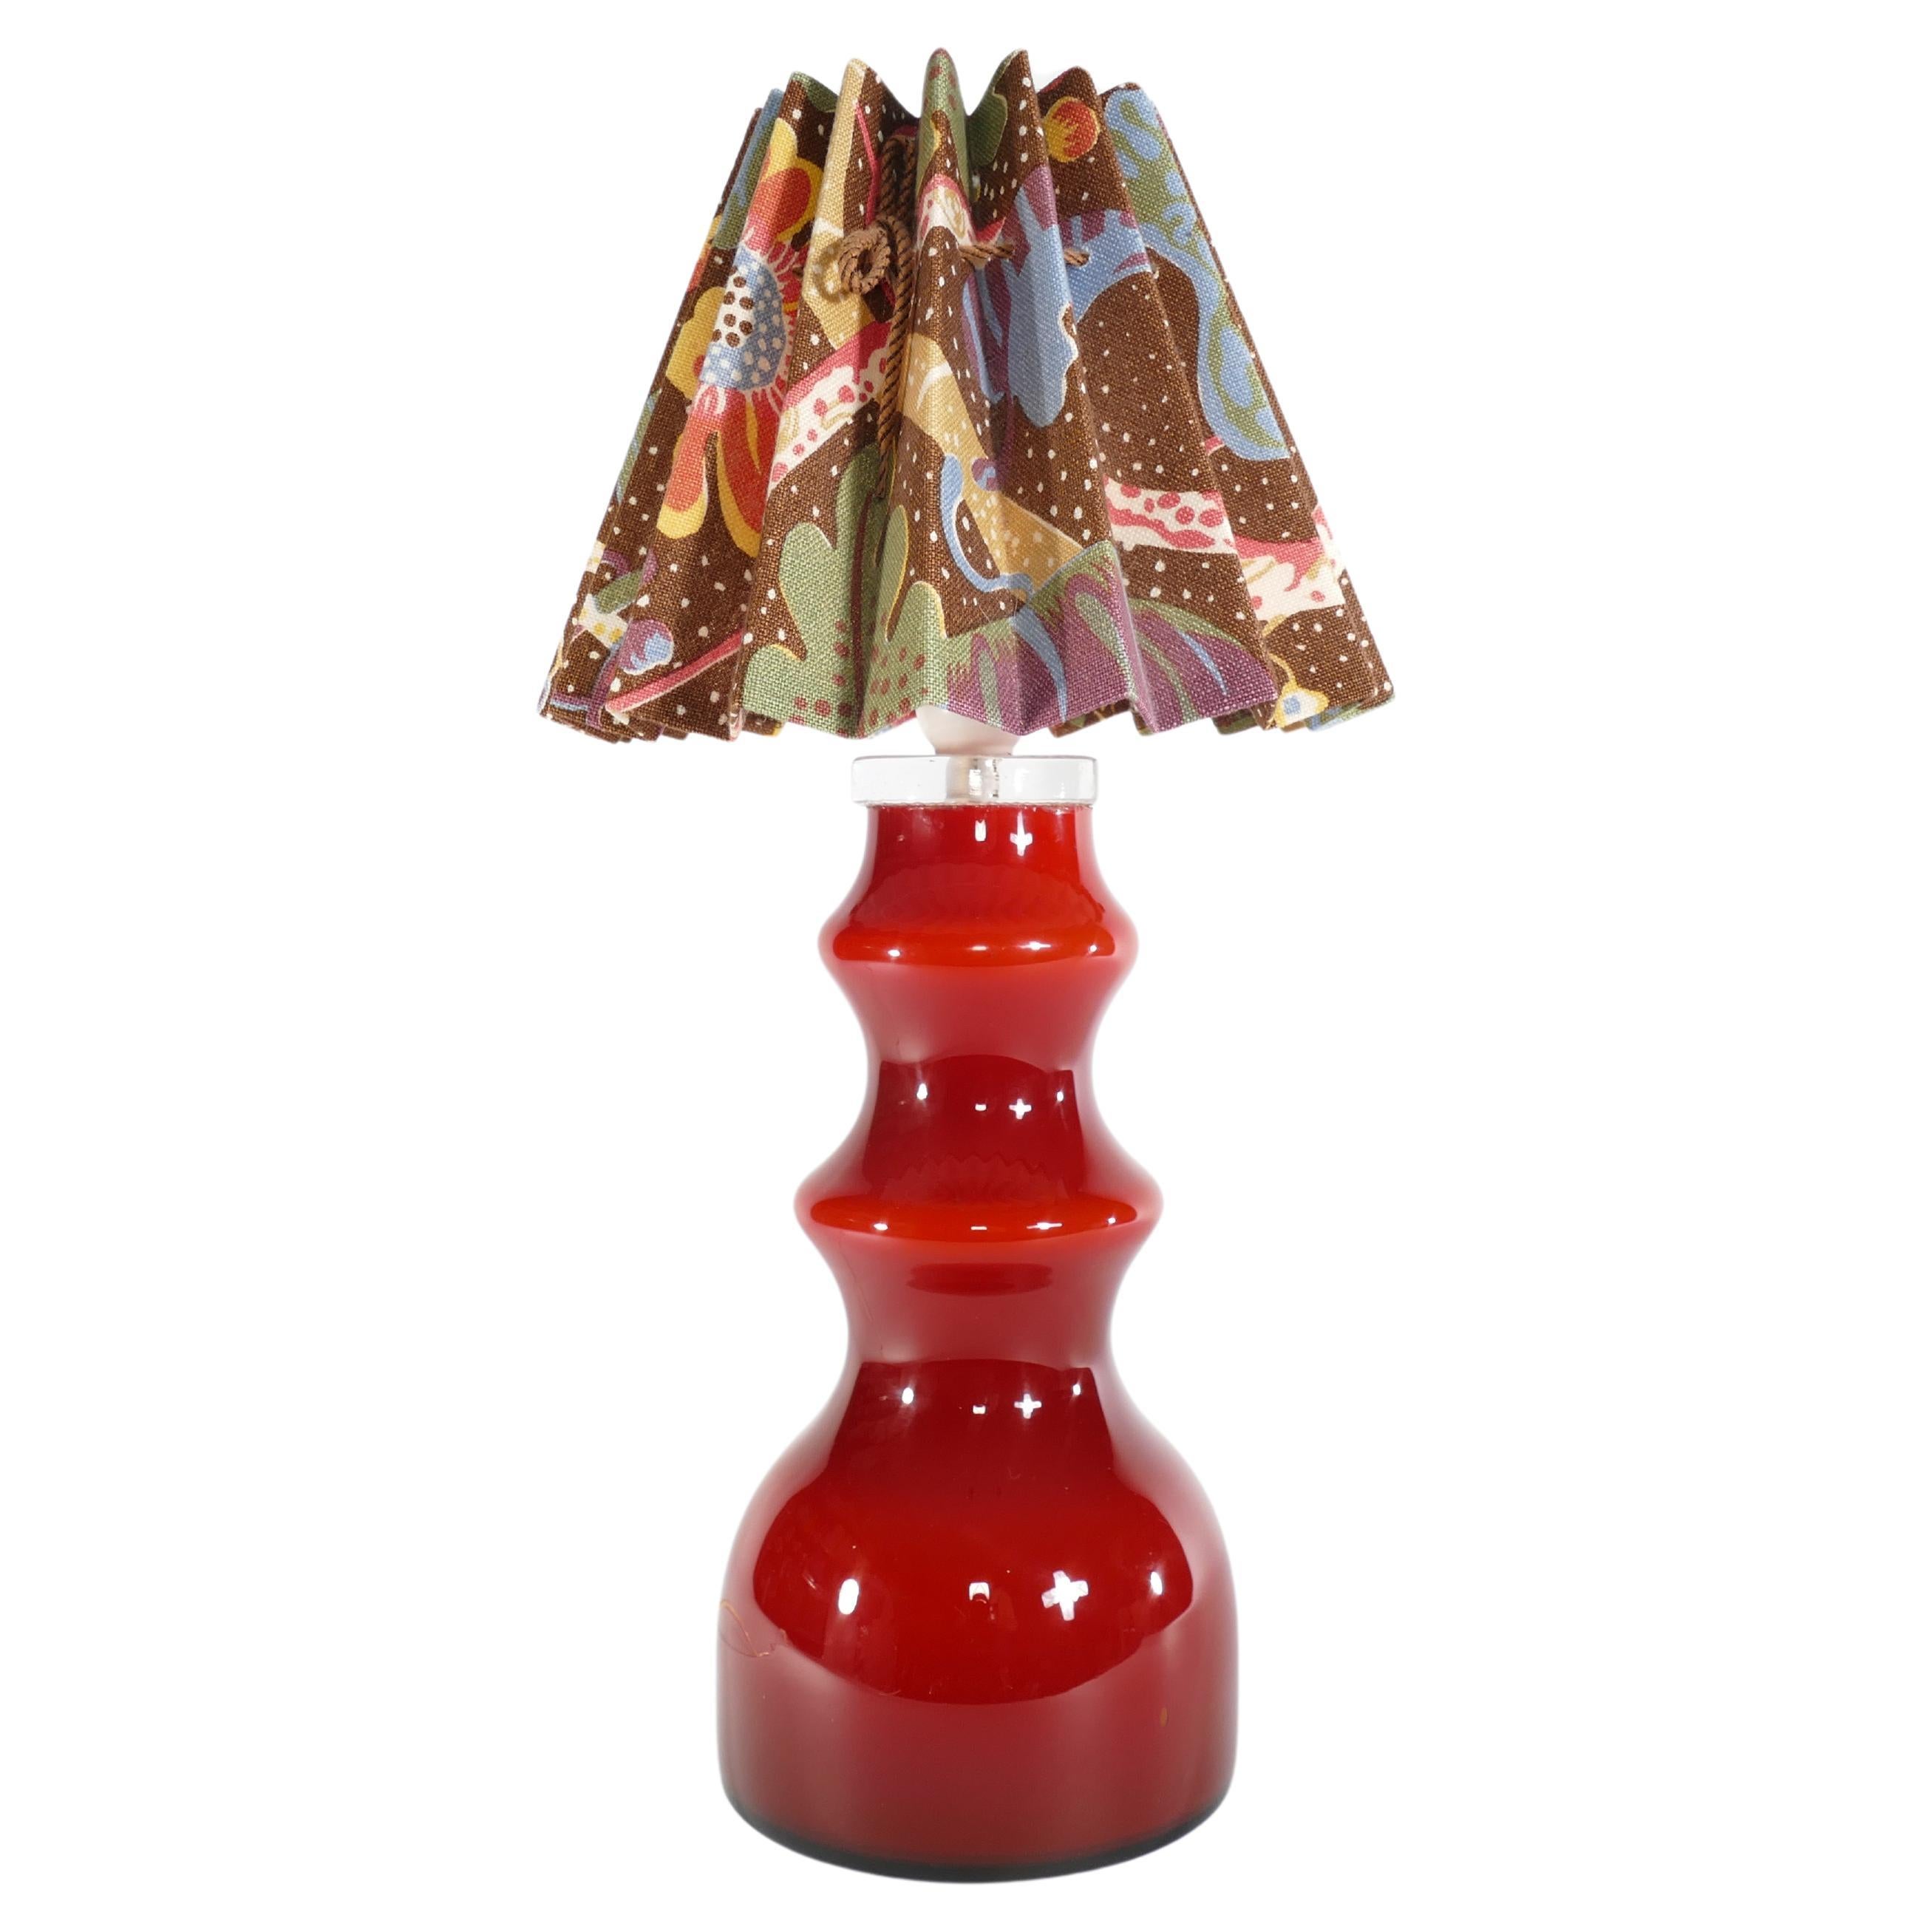 Scandinavian Modern Oxblood Red Table Lamp  by Gert Nyström for Hyllinge For Sale